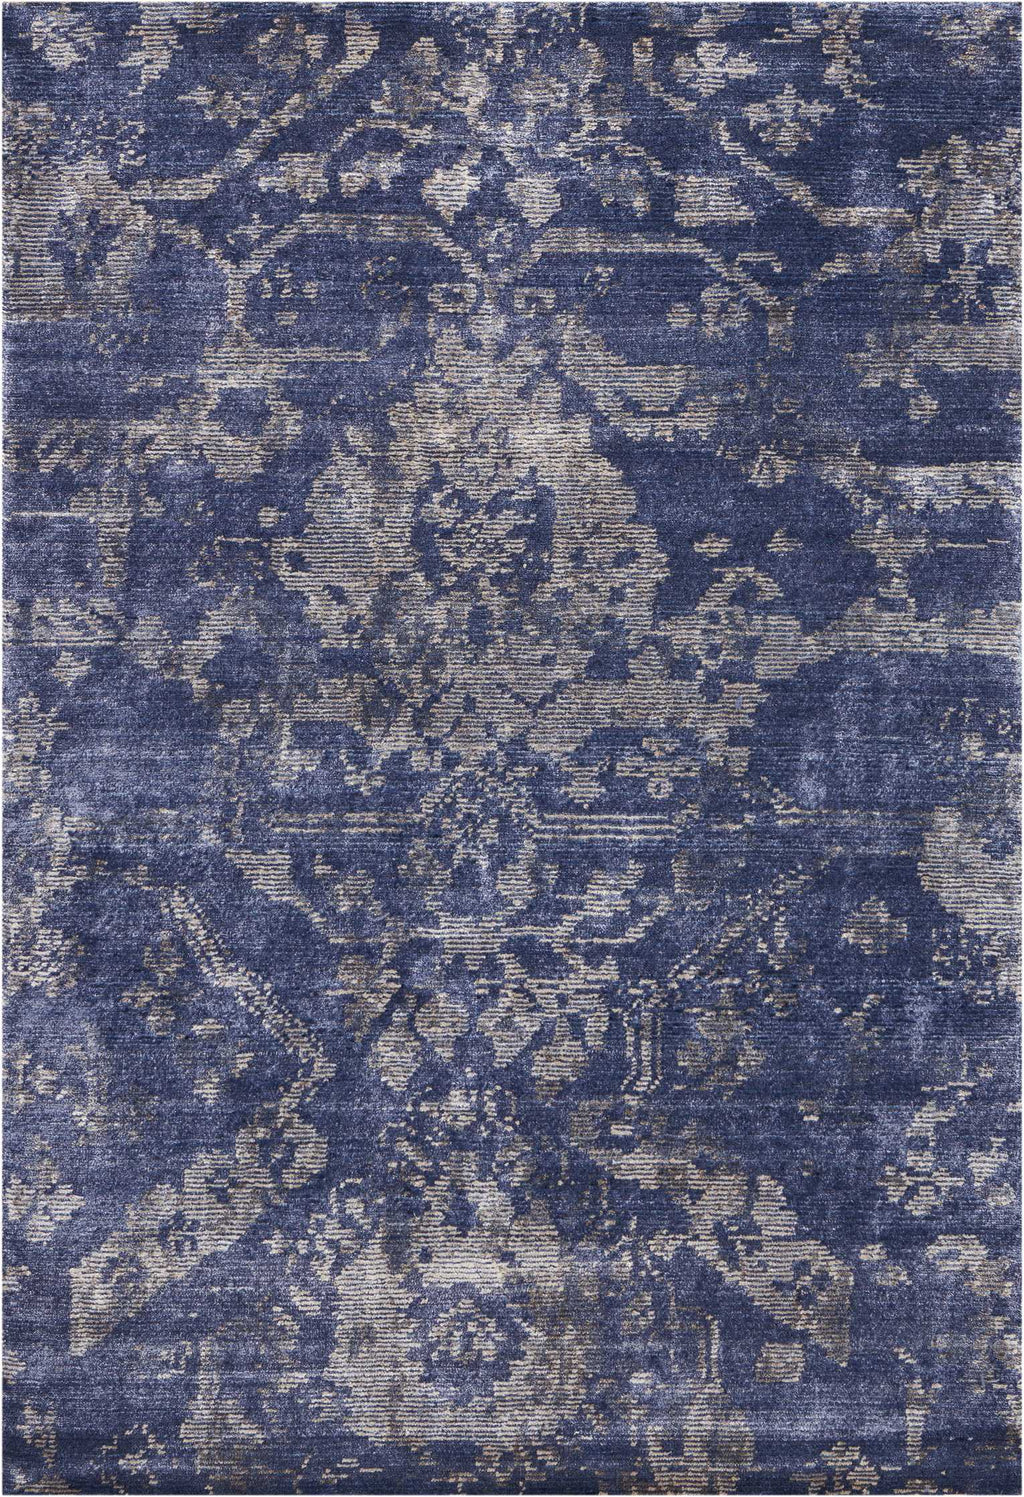 Distressed vintage rug with traditional motifs in shades of blue.